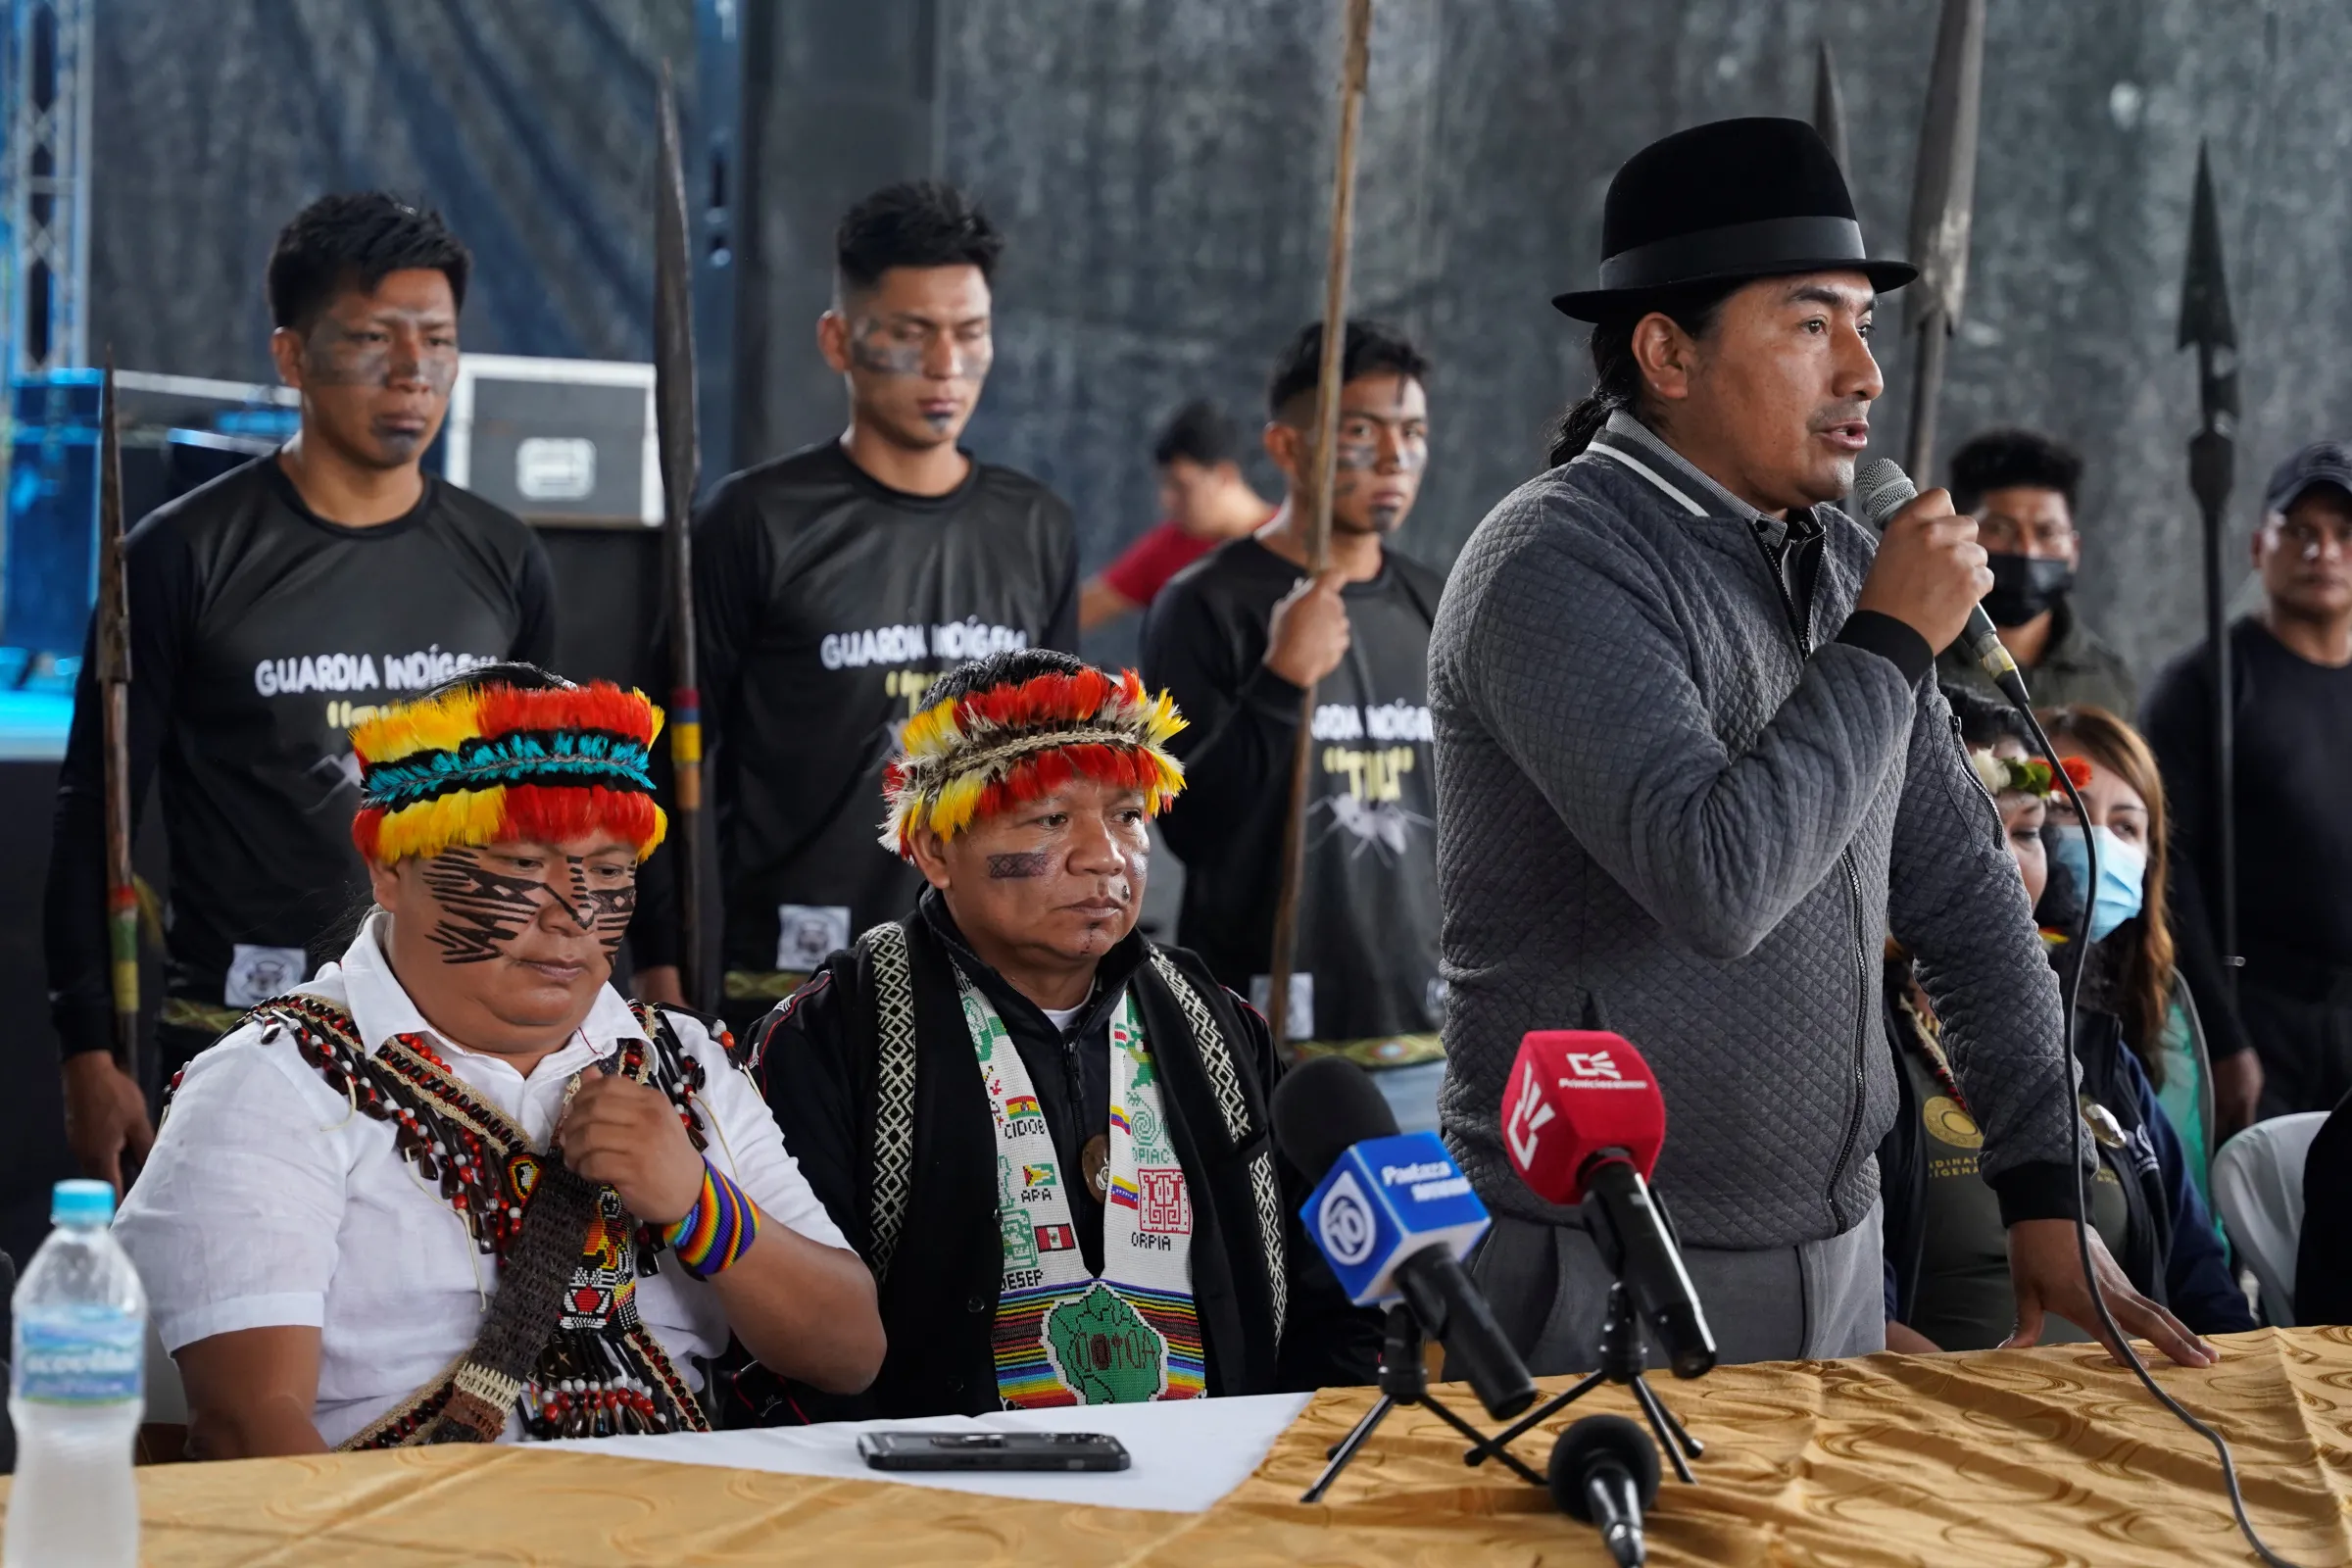 Leaders from indigenous communities in the Amazon basin hold a news conference during a meeting where they demanded South American governments halt extractive industries that damage the rainforest, in Union Base, Ecuador